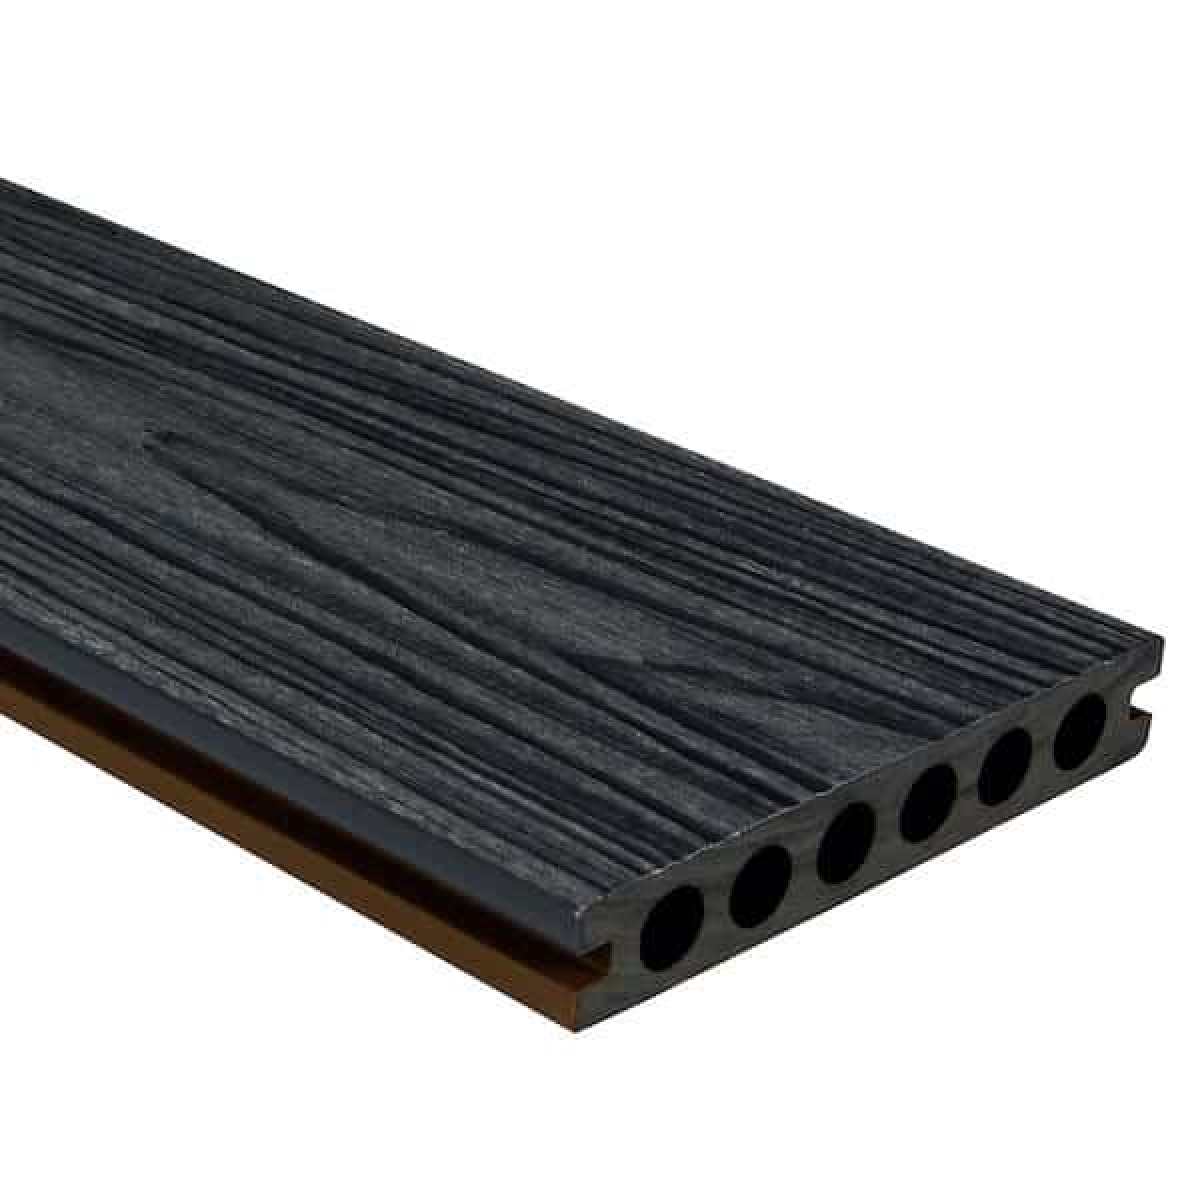 hd deck dual carbon Image by Websters Timber